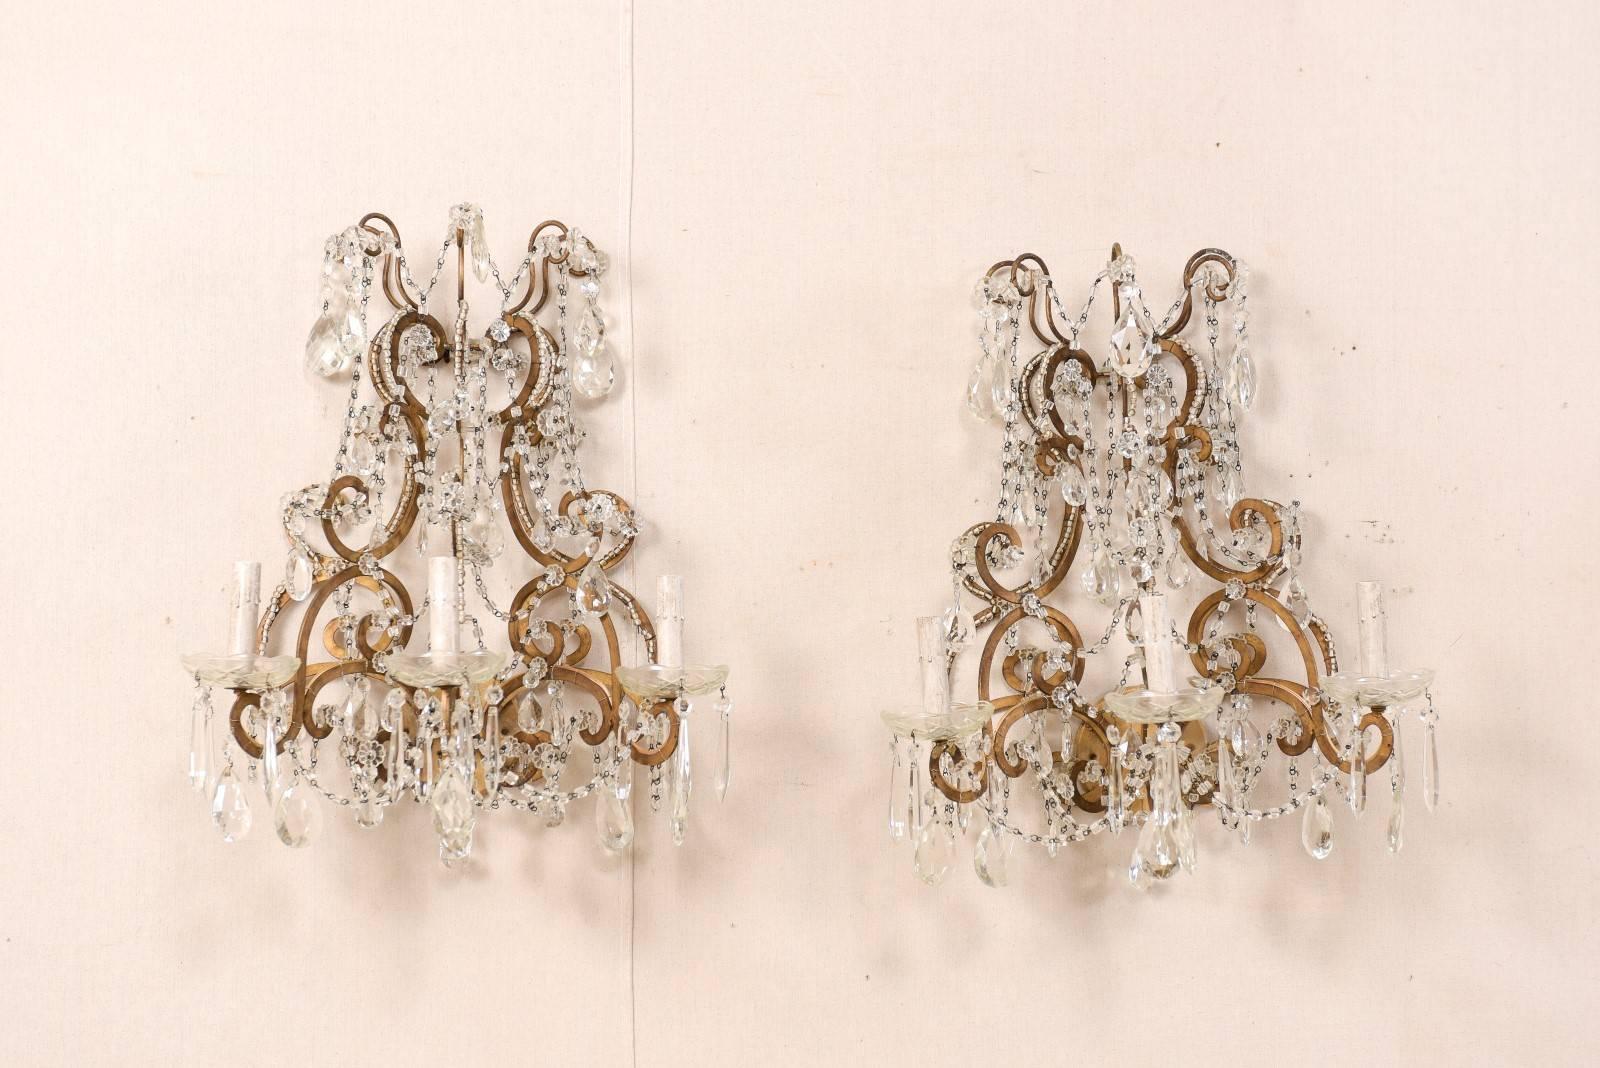 A pair of Italian mid-20th century crystal three-light wall sconces. This pair of Italian crystal sconces from the mid-20th century features a variety of faceted crystals ornately decorating the scrolled and gilded metal armature and arms. Strands